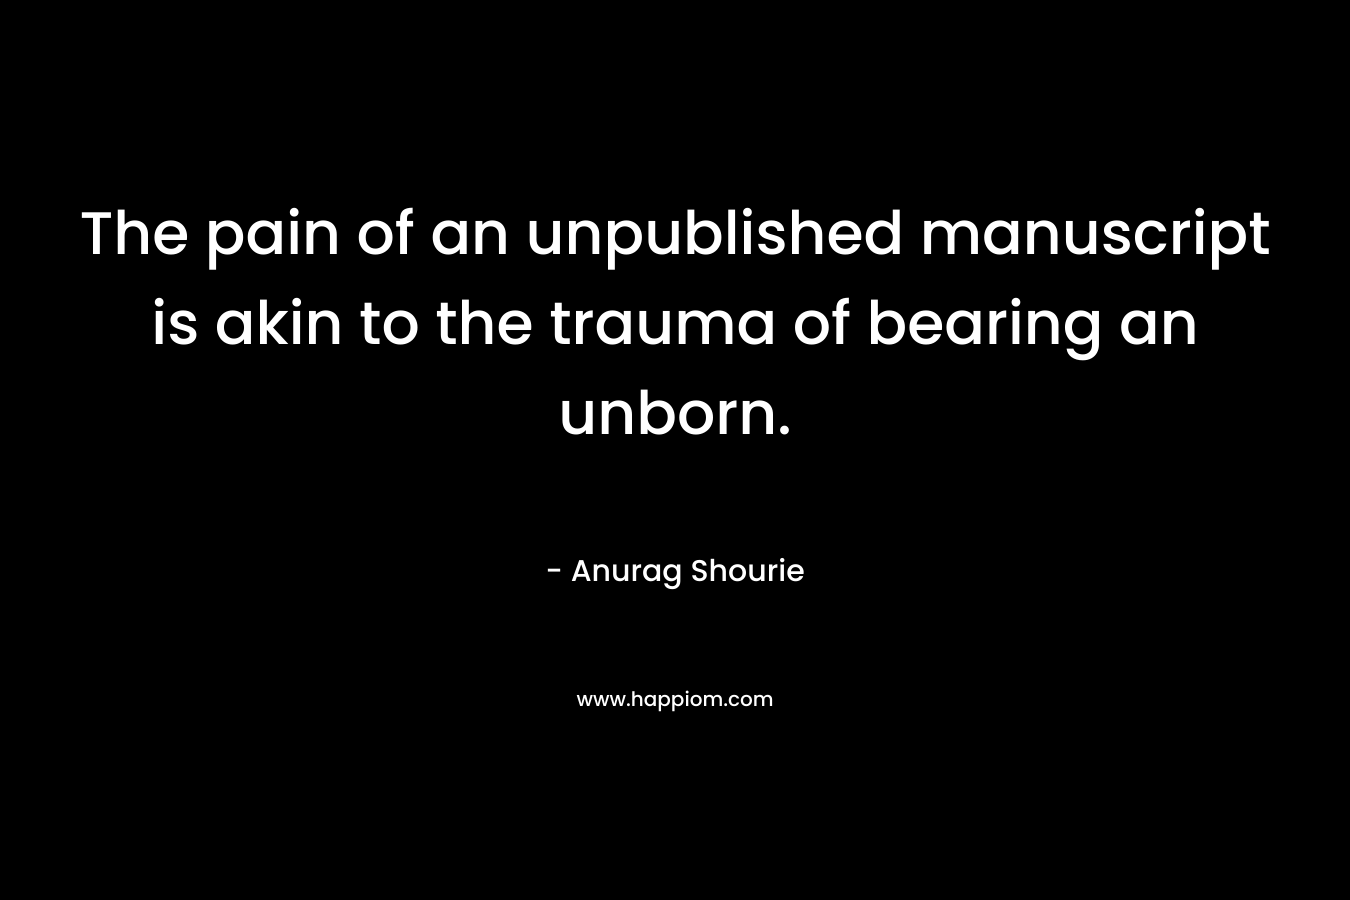 The pain of an unpublished manuscript is akin to the trauma of bearing an unborn. – Anurag Shourie